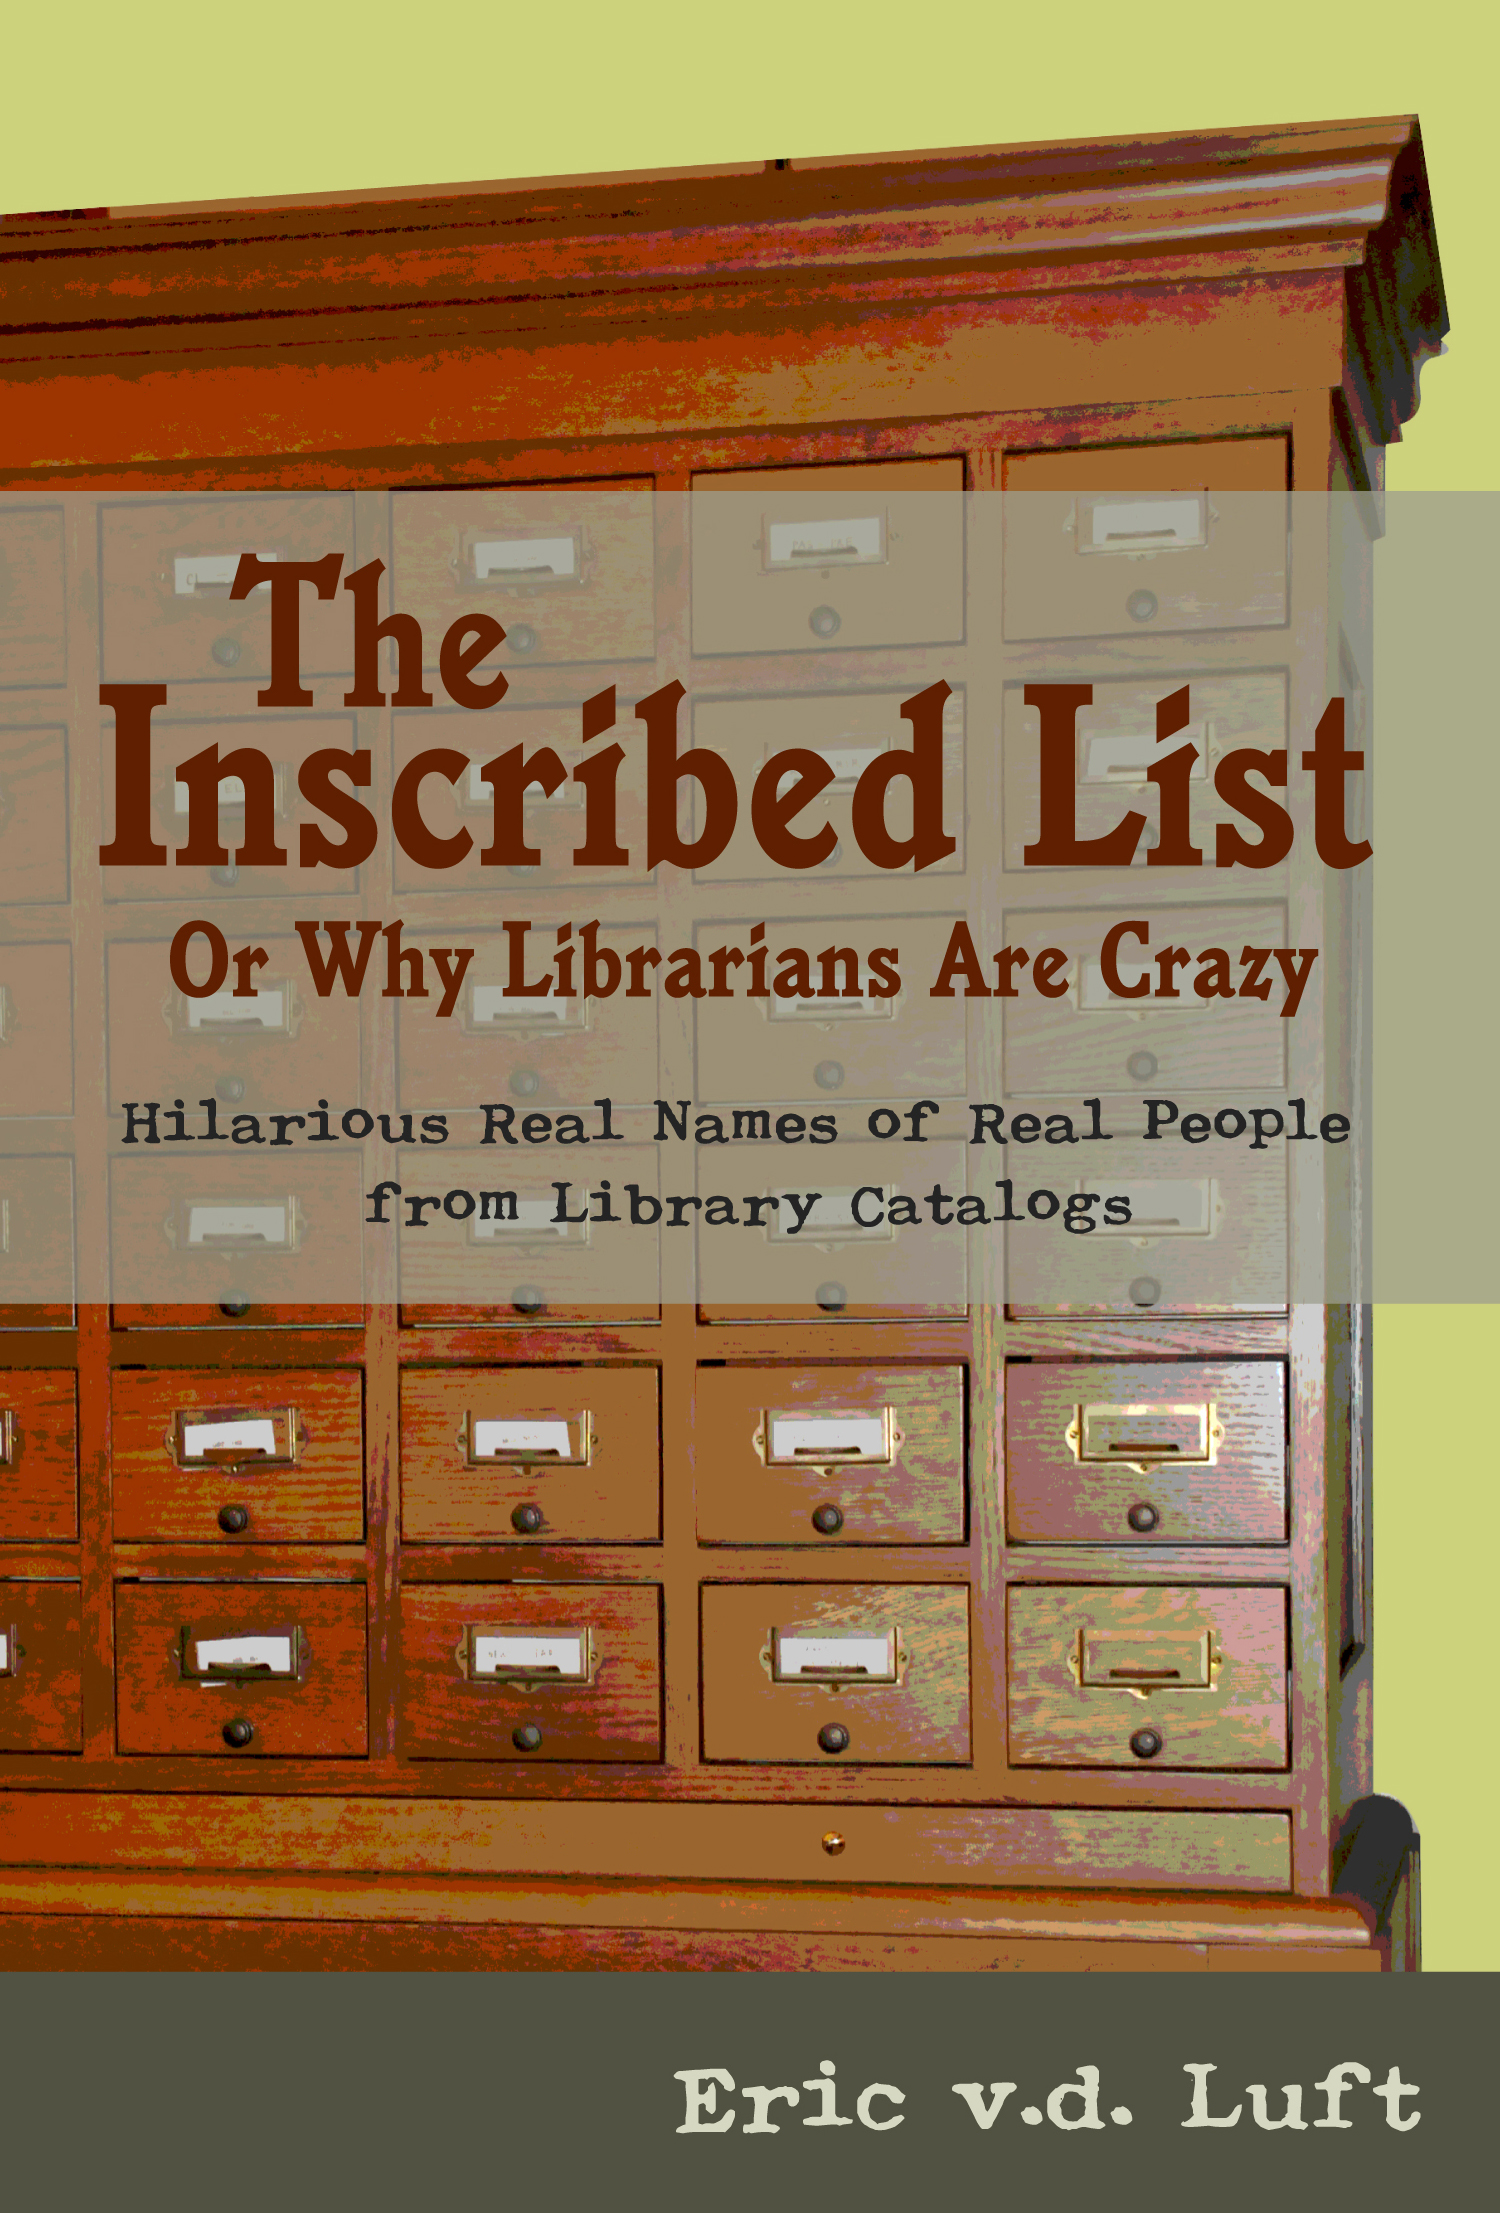 The Inscribed List: or, Why Librarians Are Crazy: Hilarious Real Names of Real People from Library Catalogs by Eric v.d. Luft